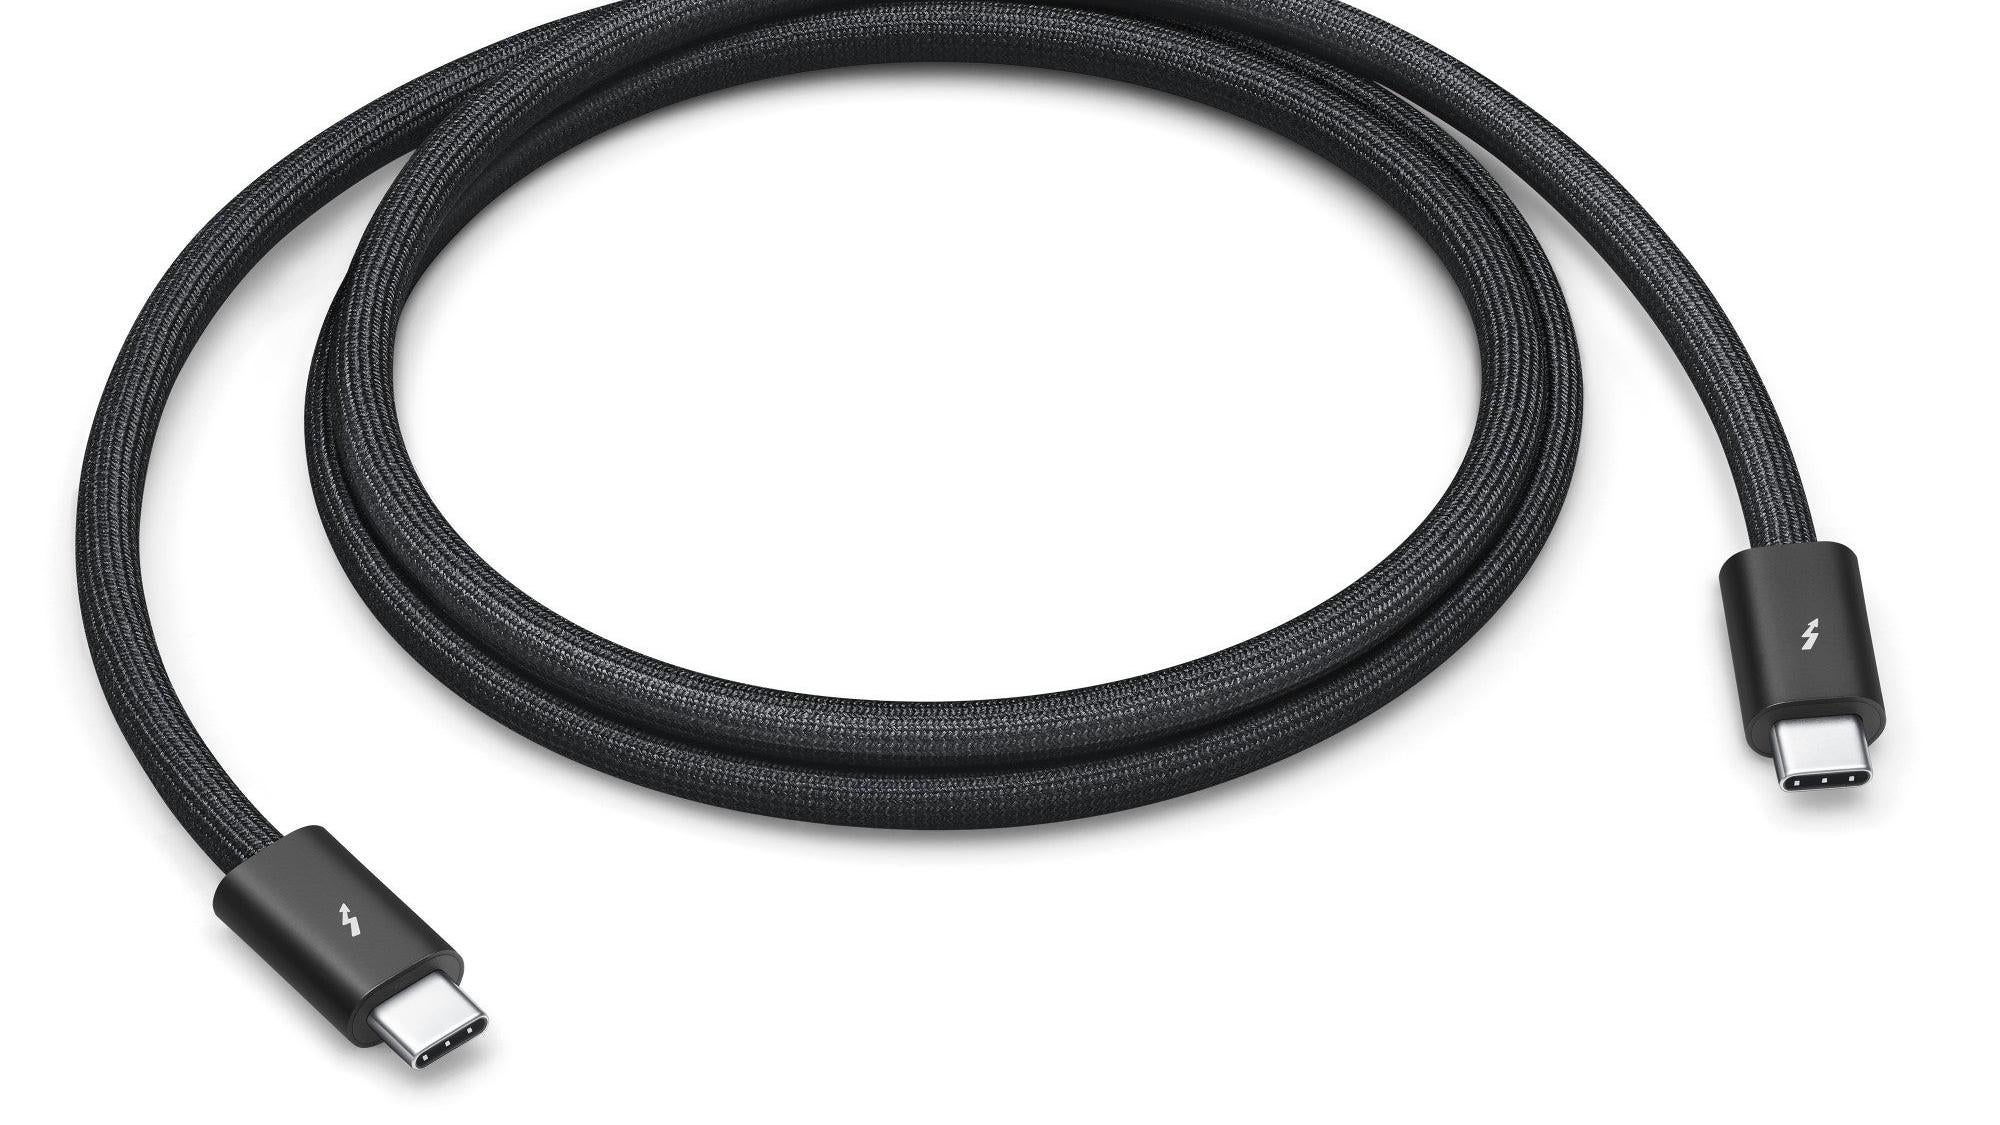 Braided Apple iPhone lightning cable pictured, expected to ship with iPhone  12 - 9to5Mac